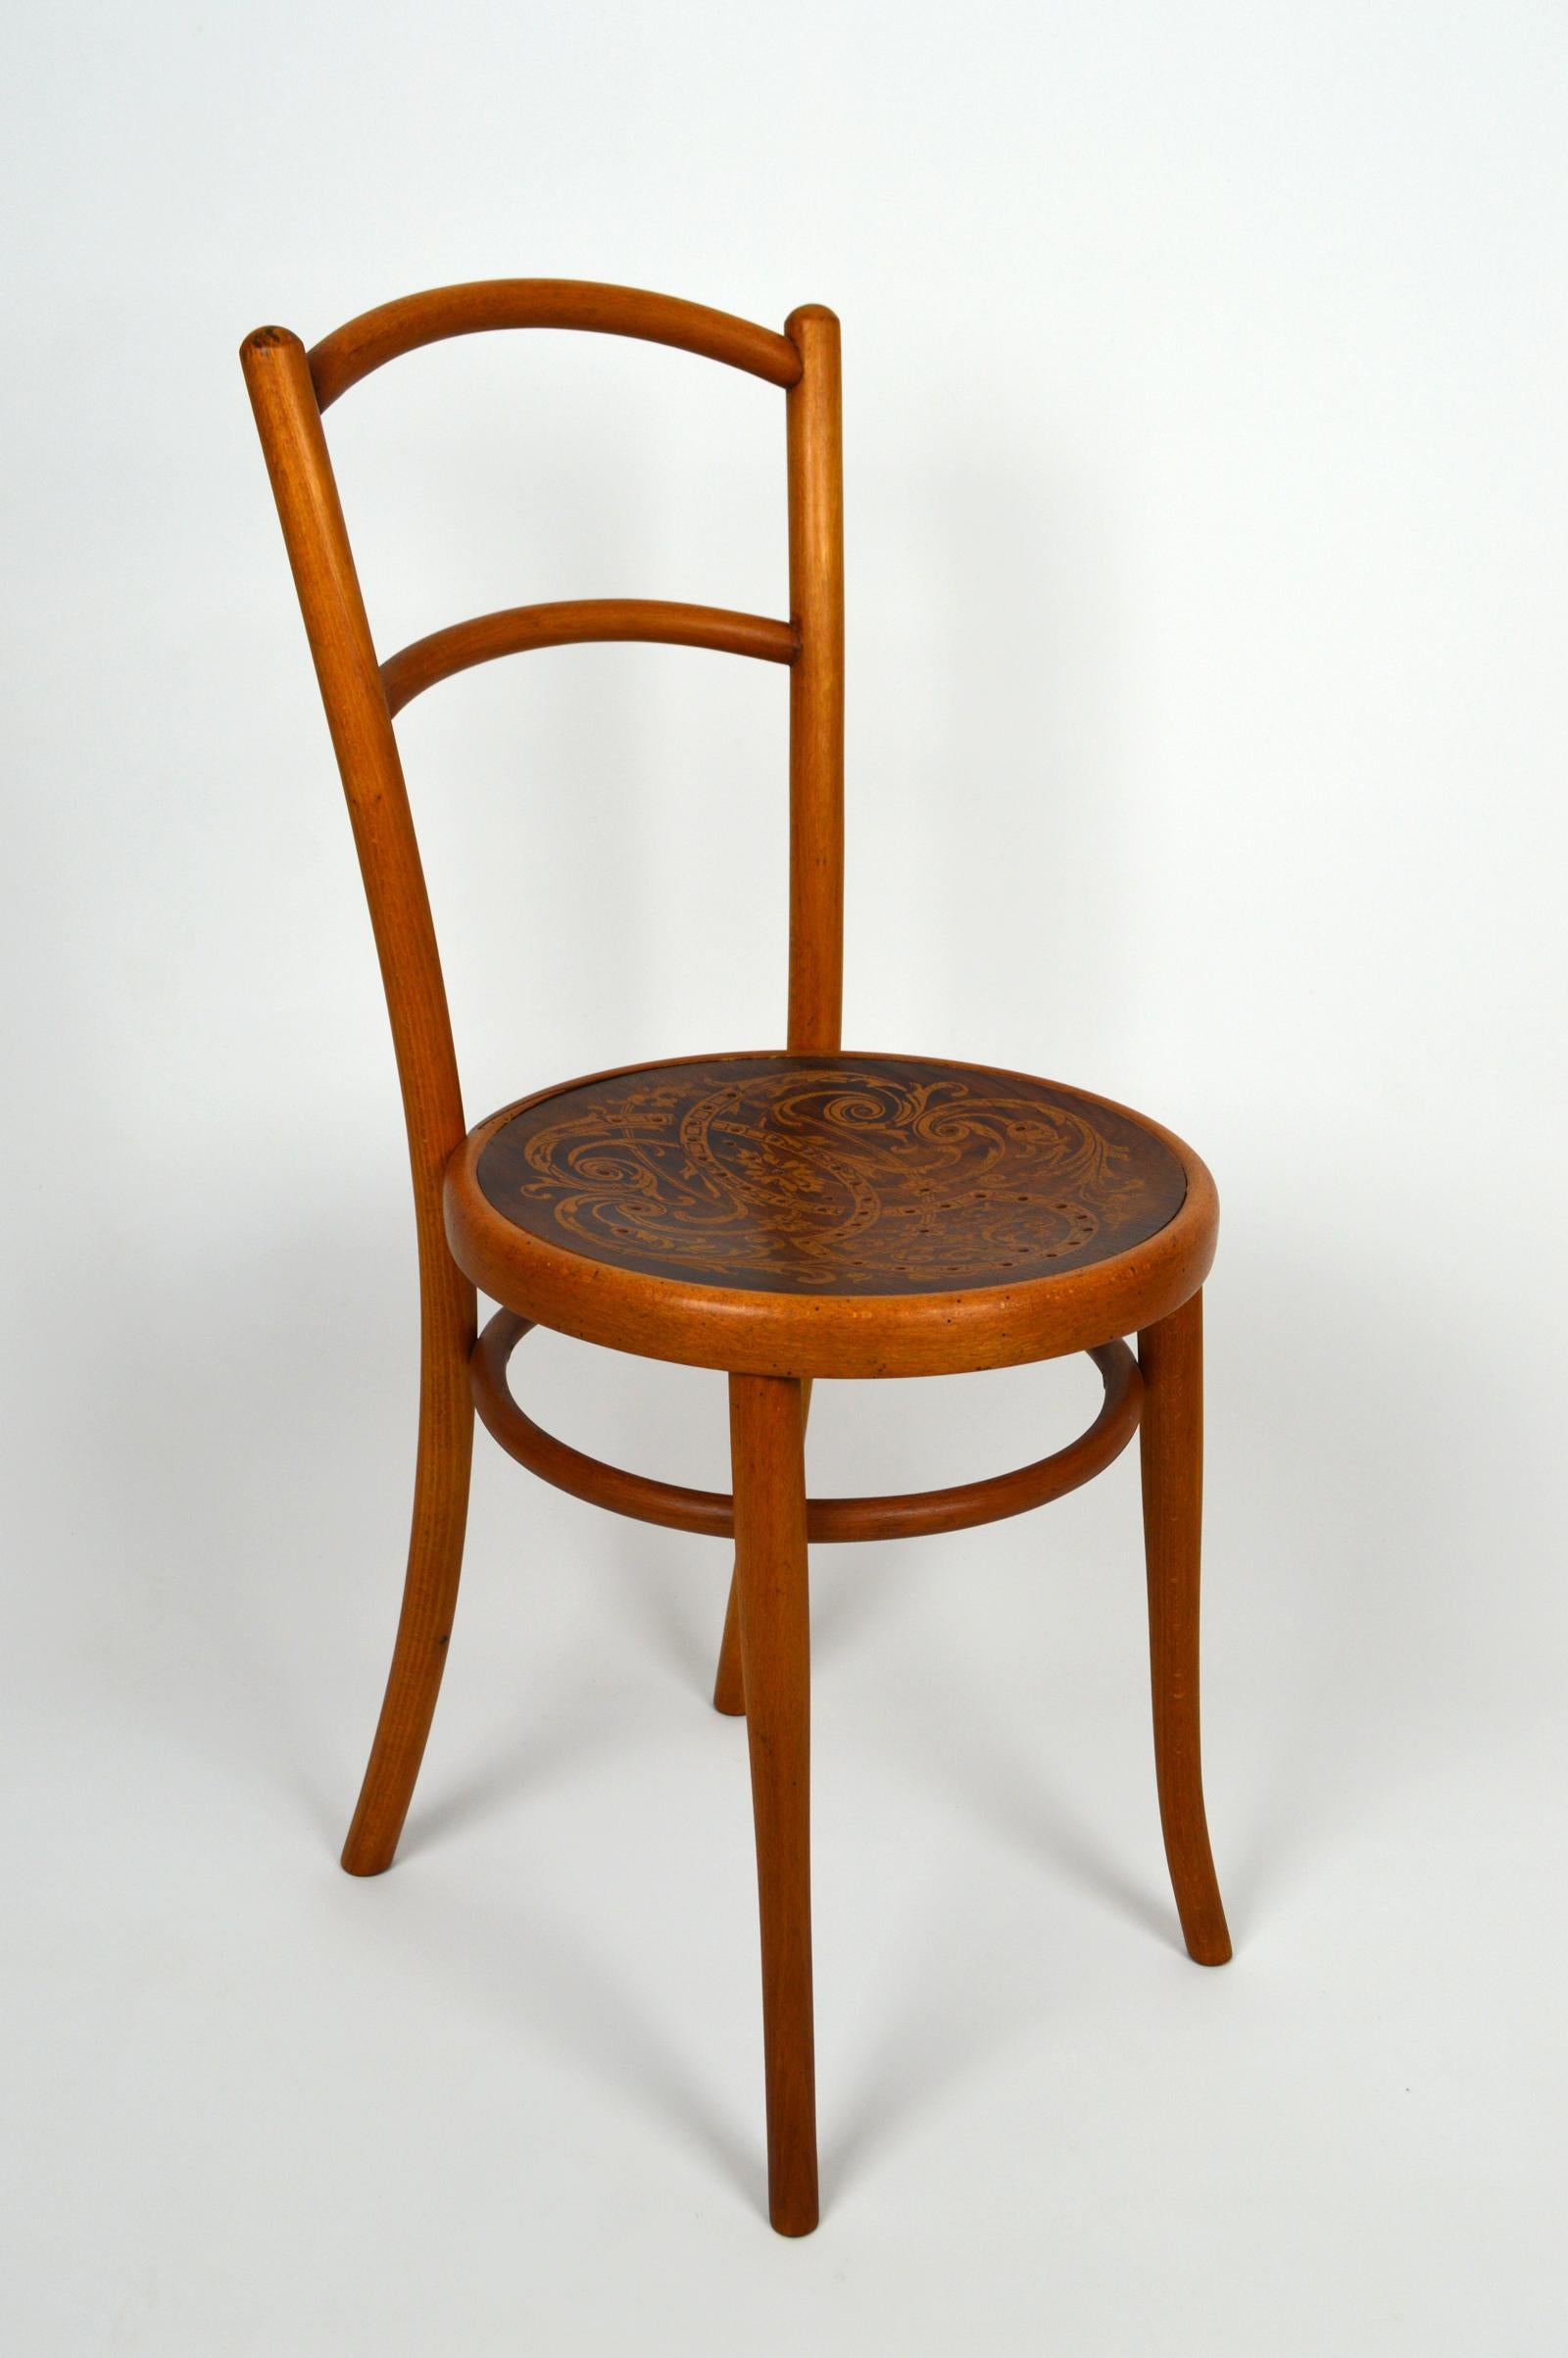 Bistro chair produced circa 1900 by the Viennese workshops Jacob & Josef Kohn

Curved beechwood, very beautiful decorated seat, stamp present: 